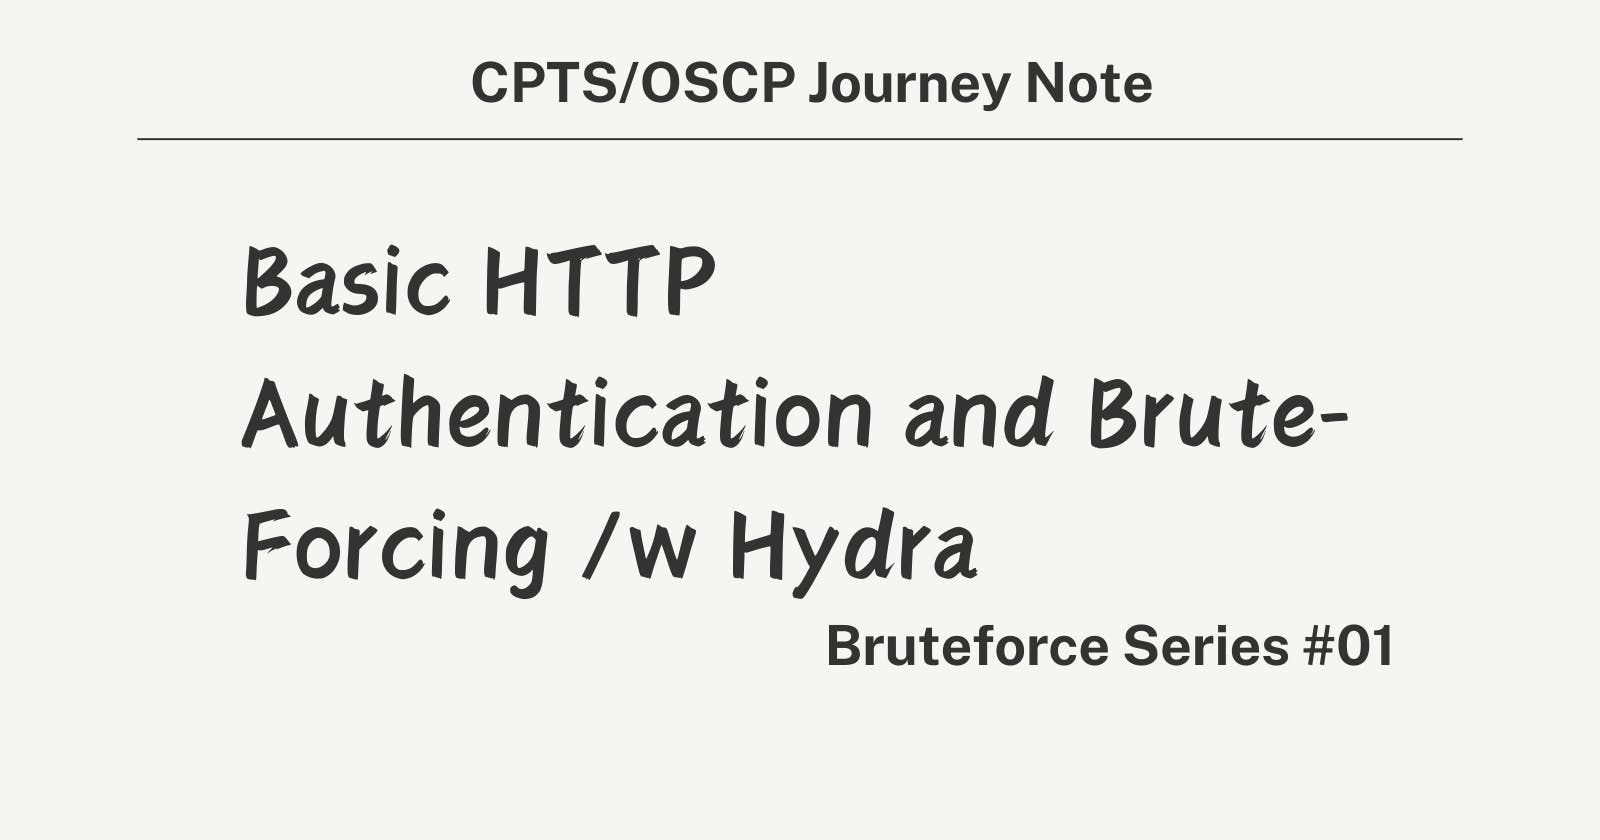 Brute-Force Series - Basic HTTP Authentication and Brute-Forcing /w Hydra - 01